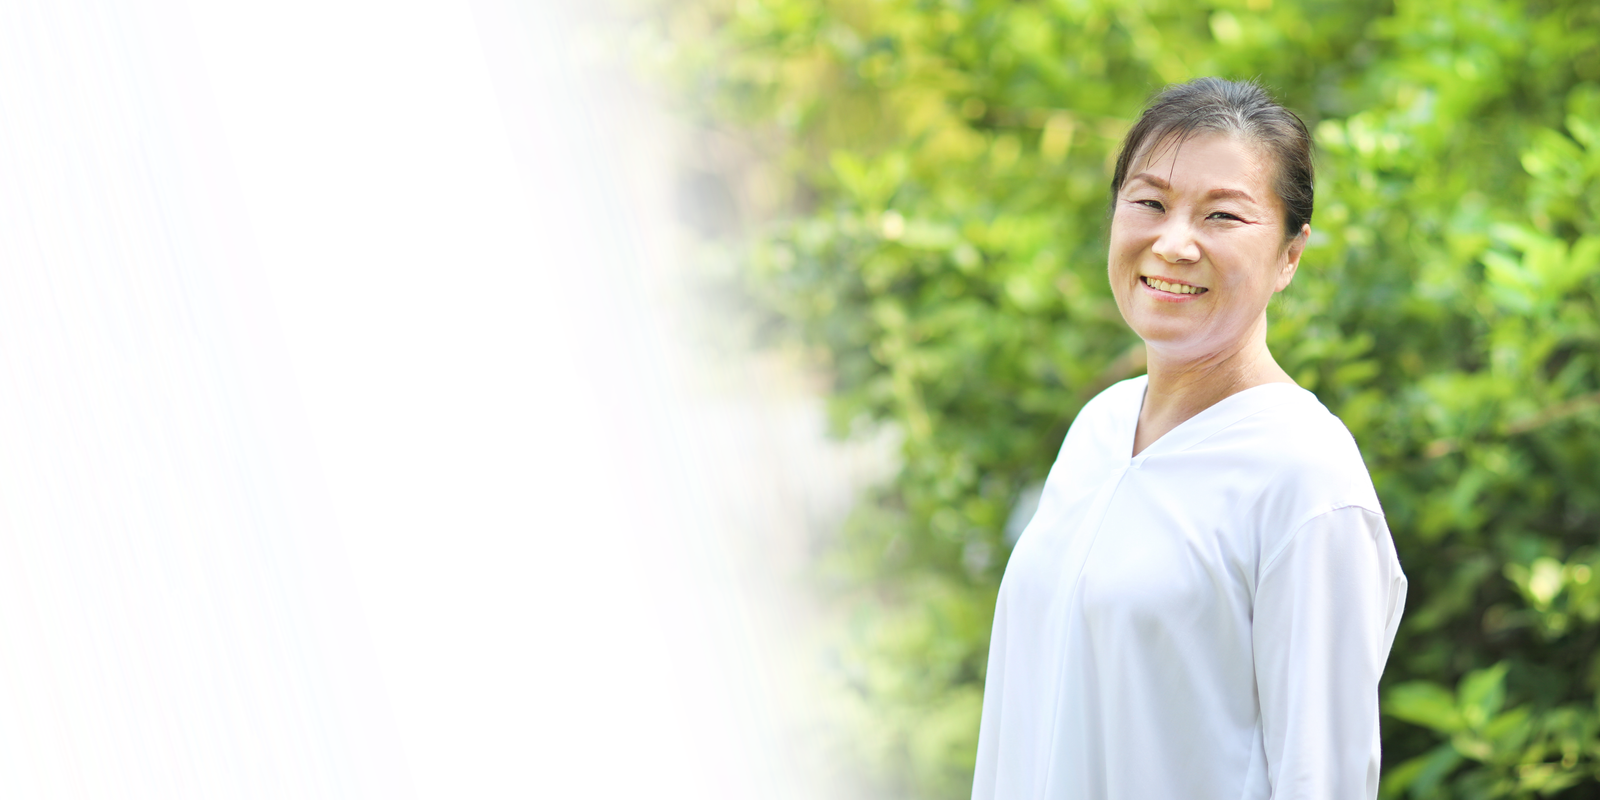 Smiling East Asian woman in white shirt against green, leafy background.